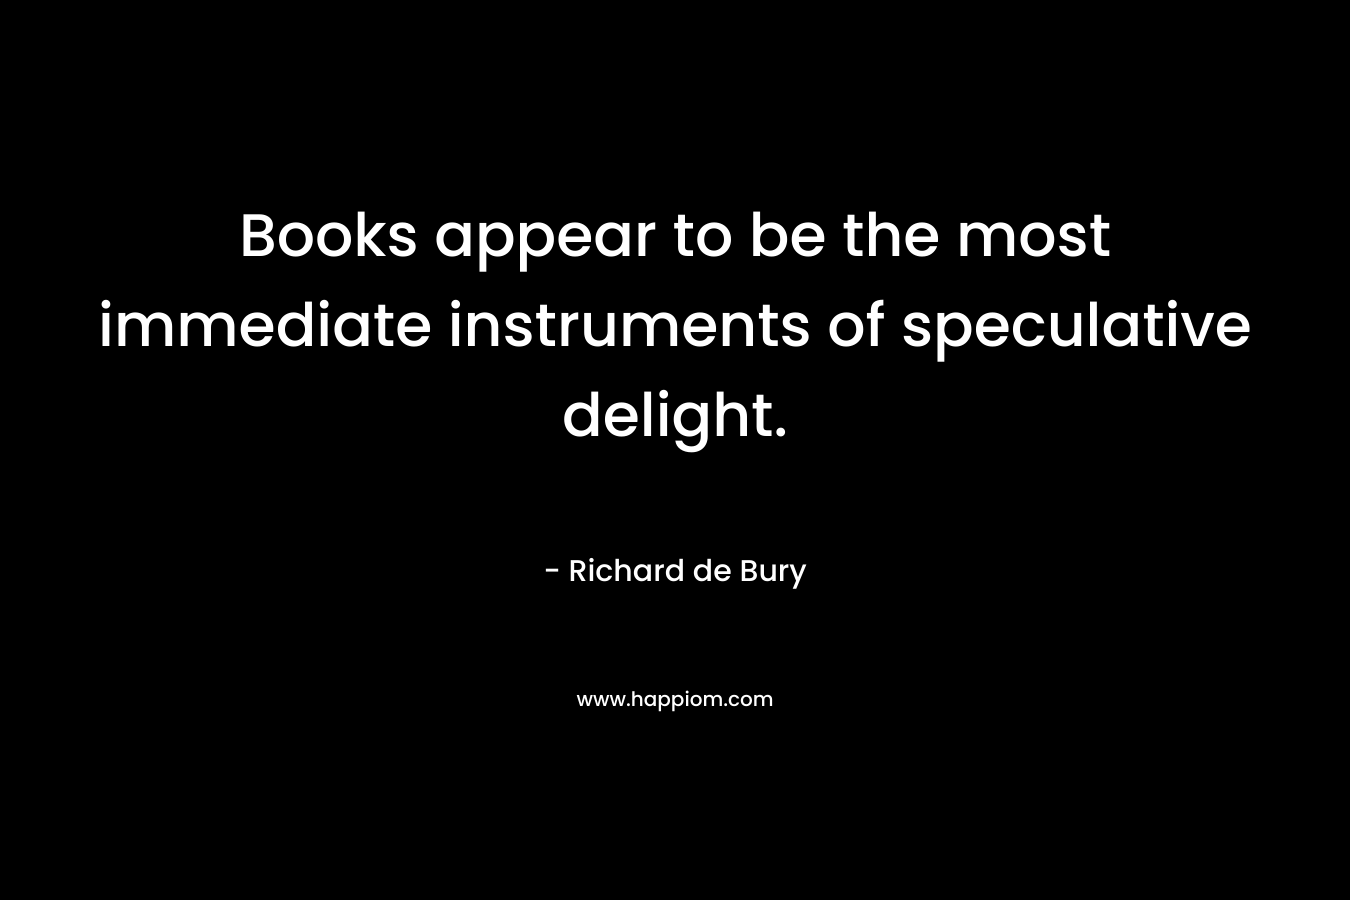 Books appear to be the most immediate instruments of speculative delight.